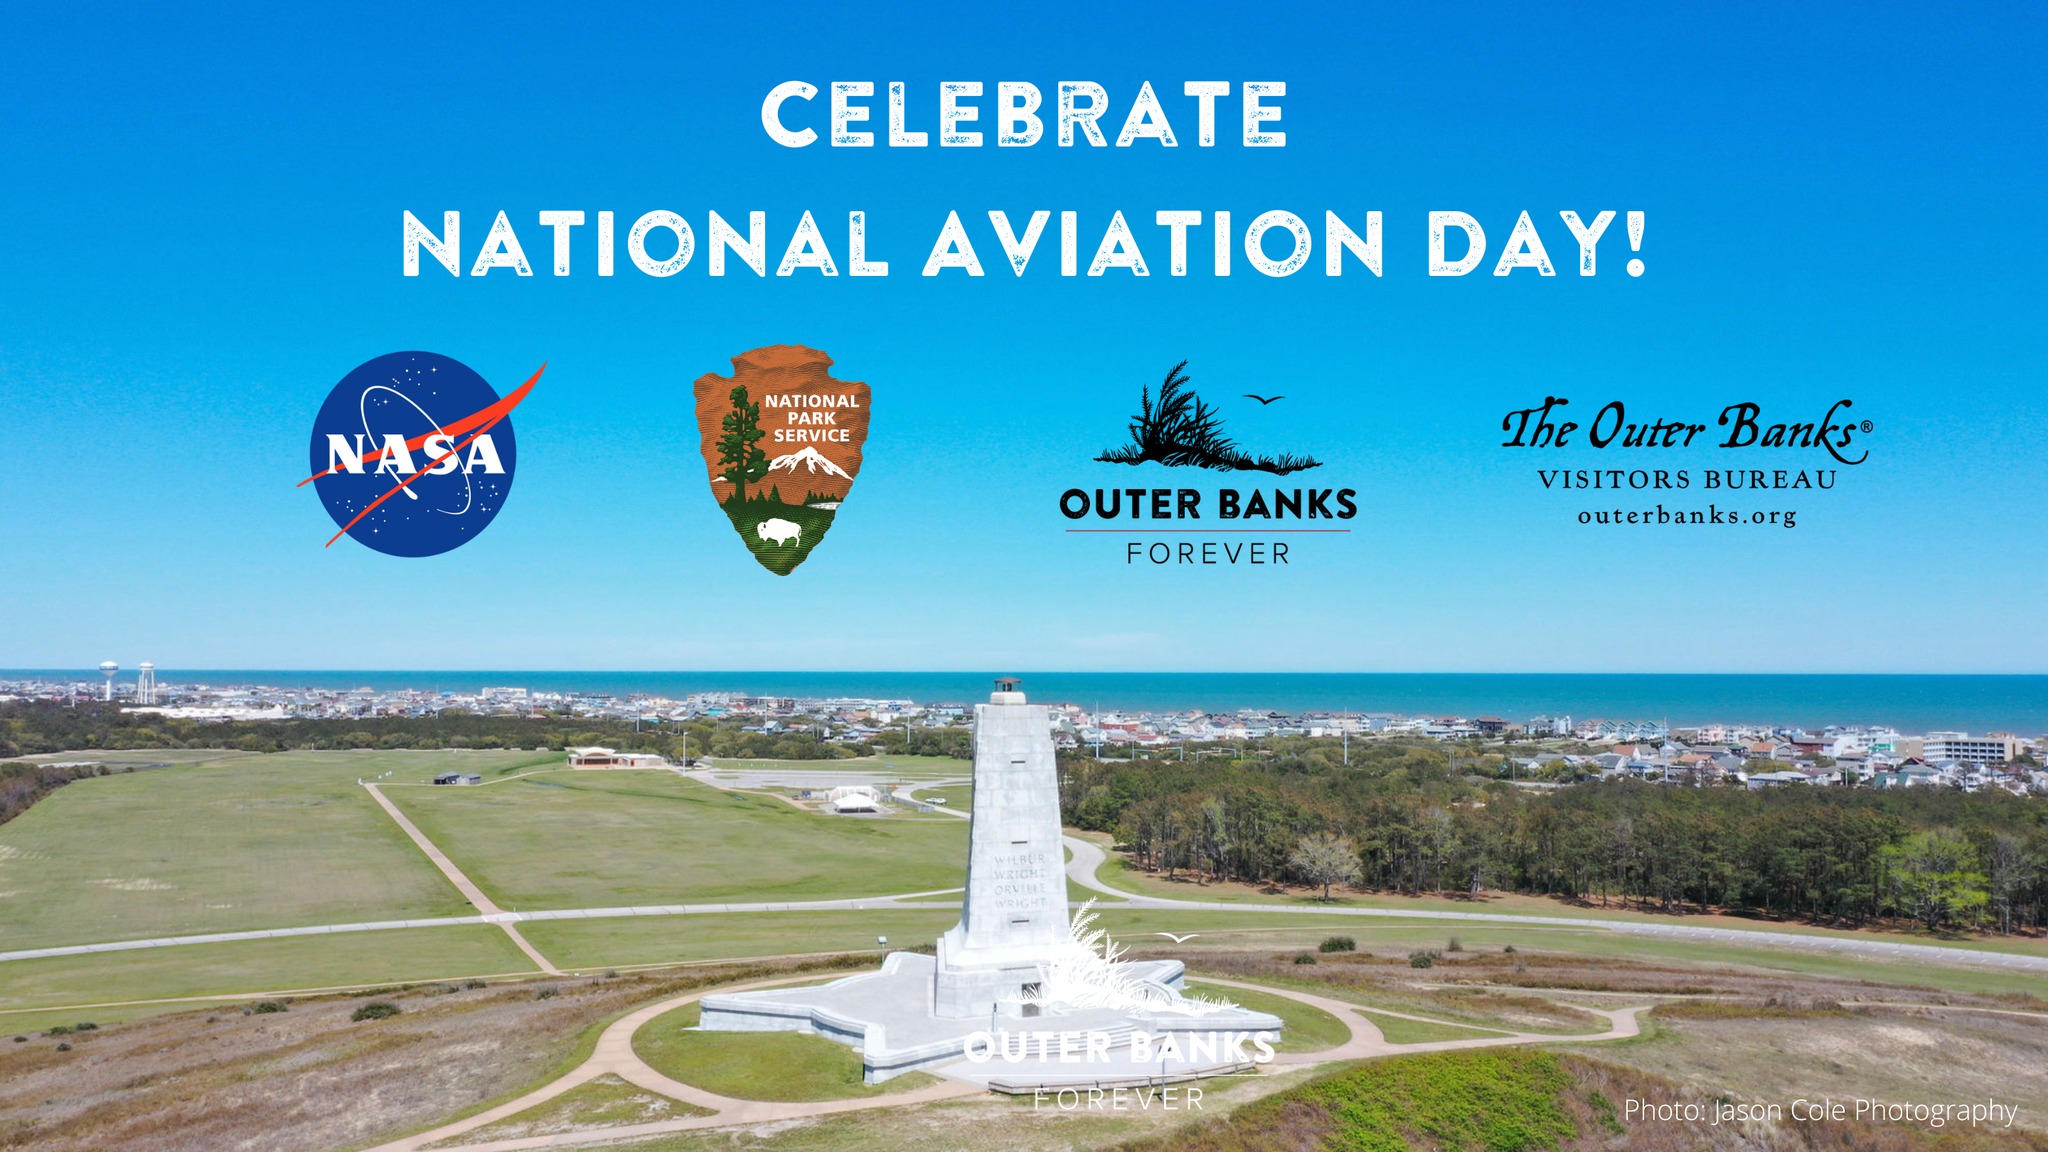 From OBX to Mars: Outer Banks Forever to livestream special National Aviation Day programs at Wright Brothers National Memorial